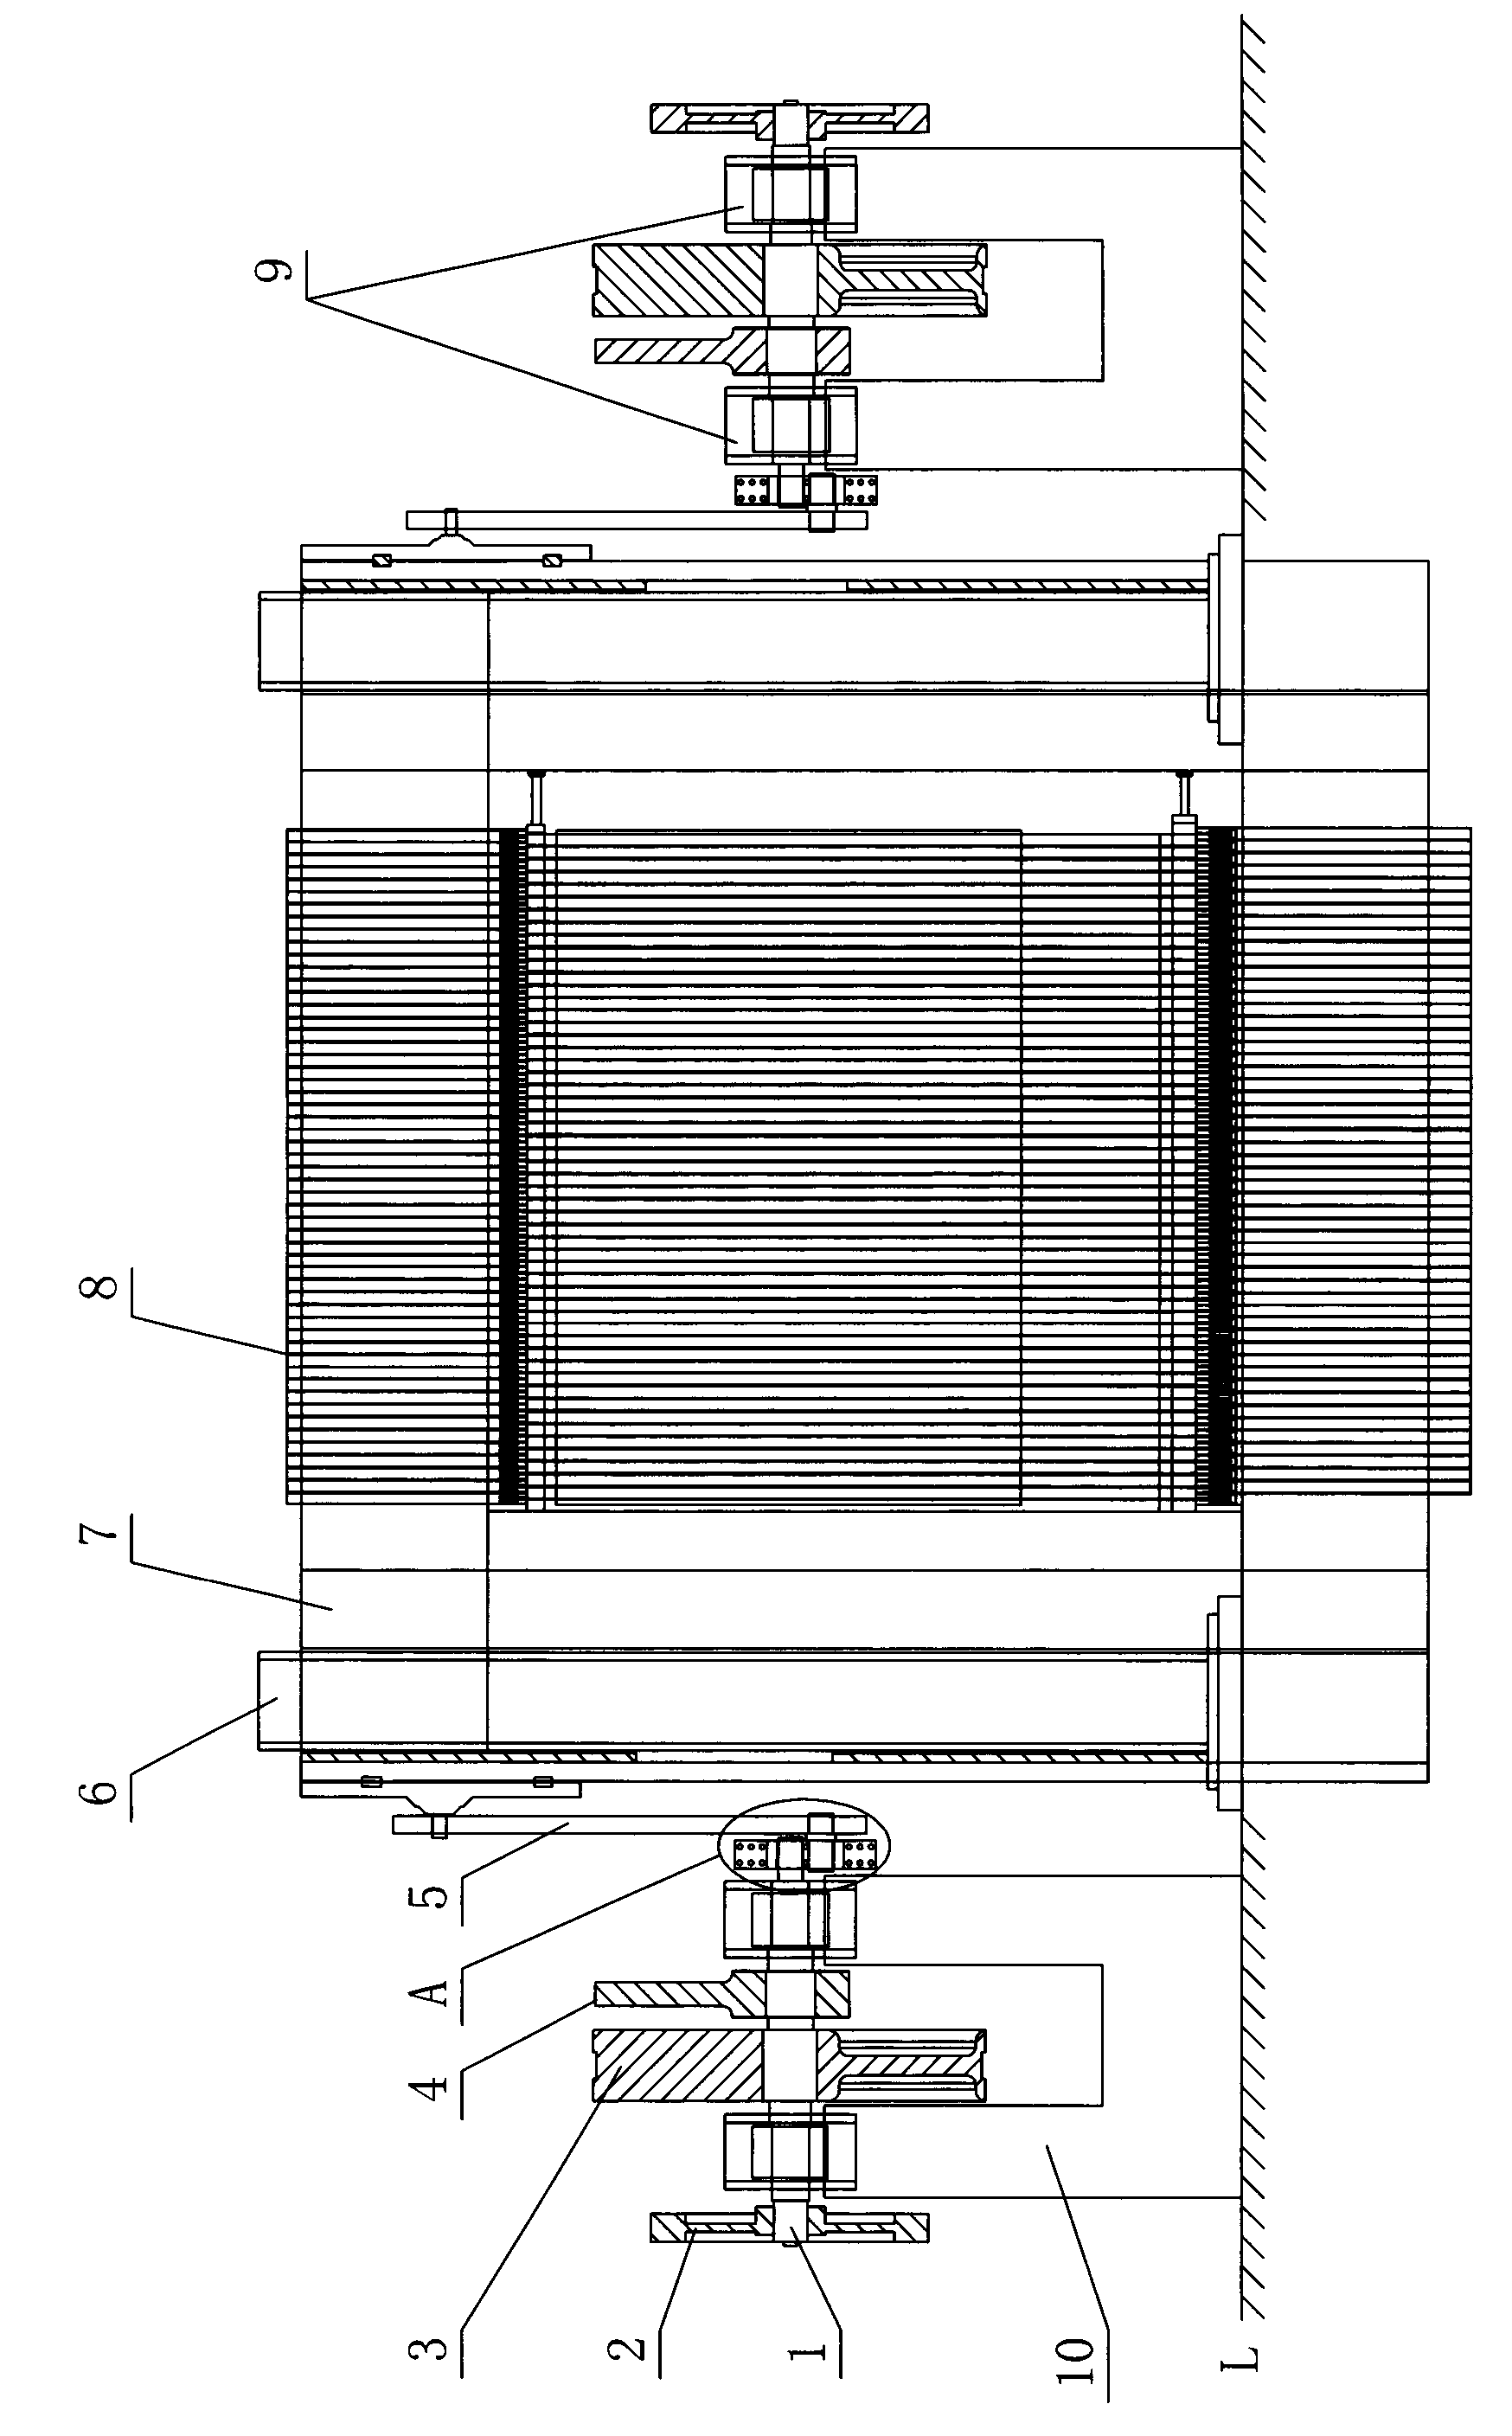 Main shaft structure of large-scale stone sawing machine